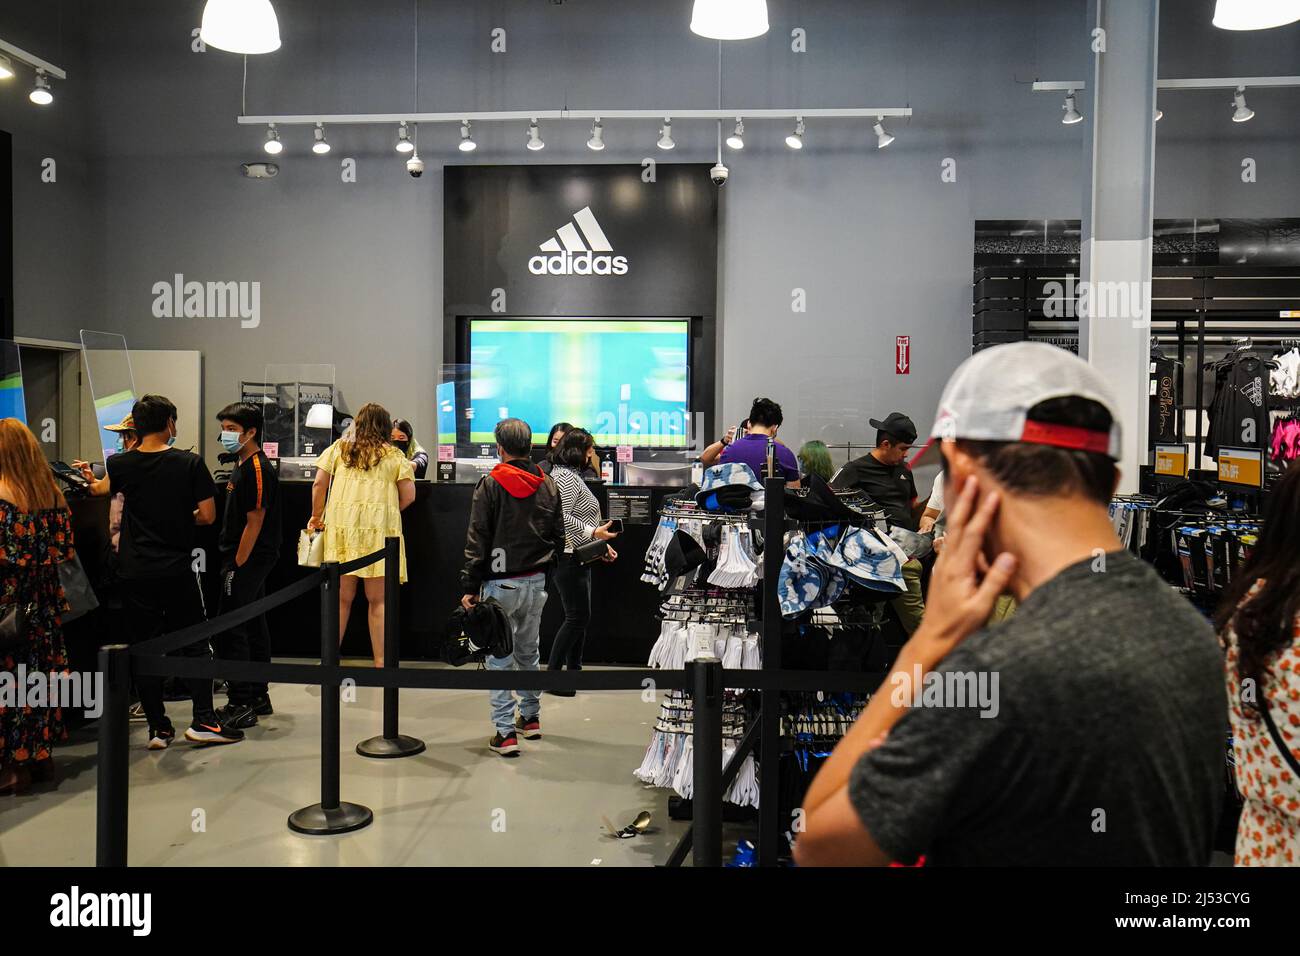 People seen shopping inside an Adidas store at The Outlets in Orange. Many  people shop at The Outlets in Orange, for clothes, shoes, watches, bags,  and backpacks with a discounted price. According